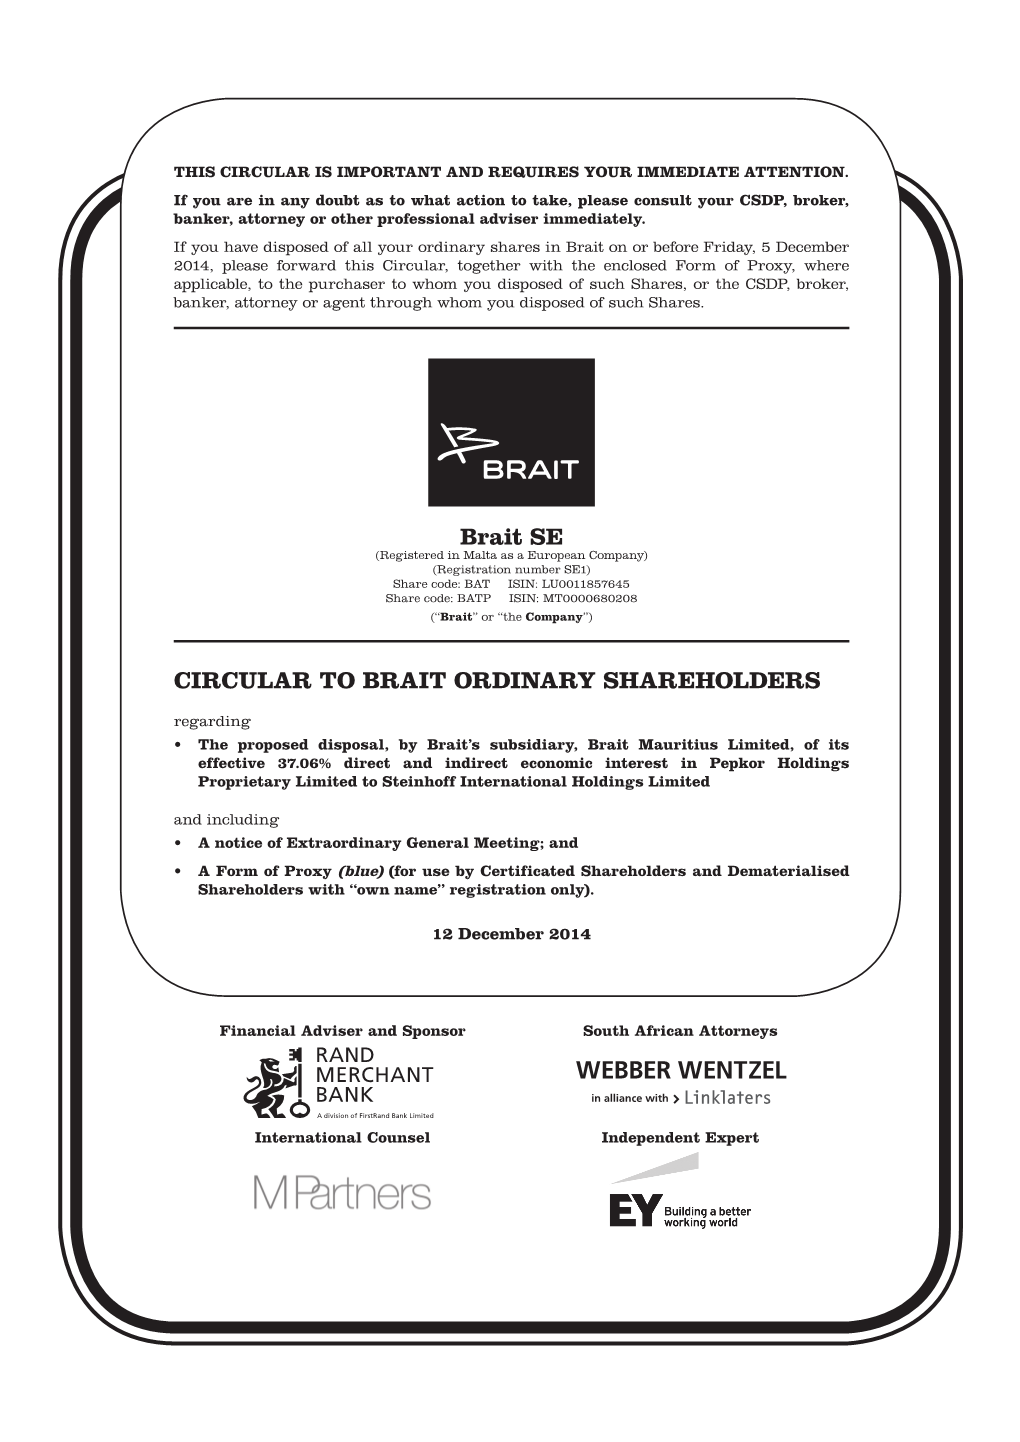 Circular to Brait Ordinary Shareholders and Notice of Extraordinary General Meeting